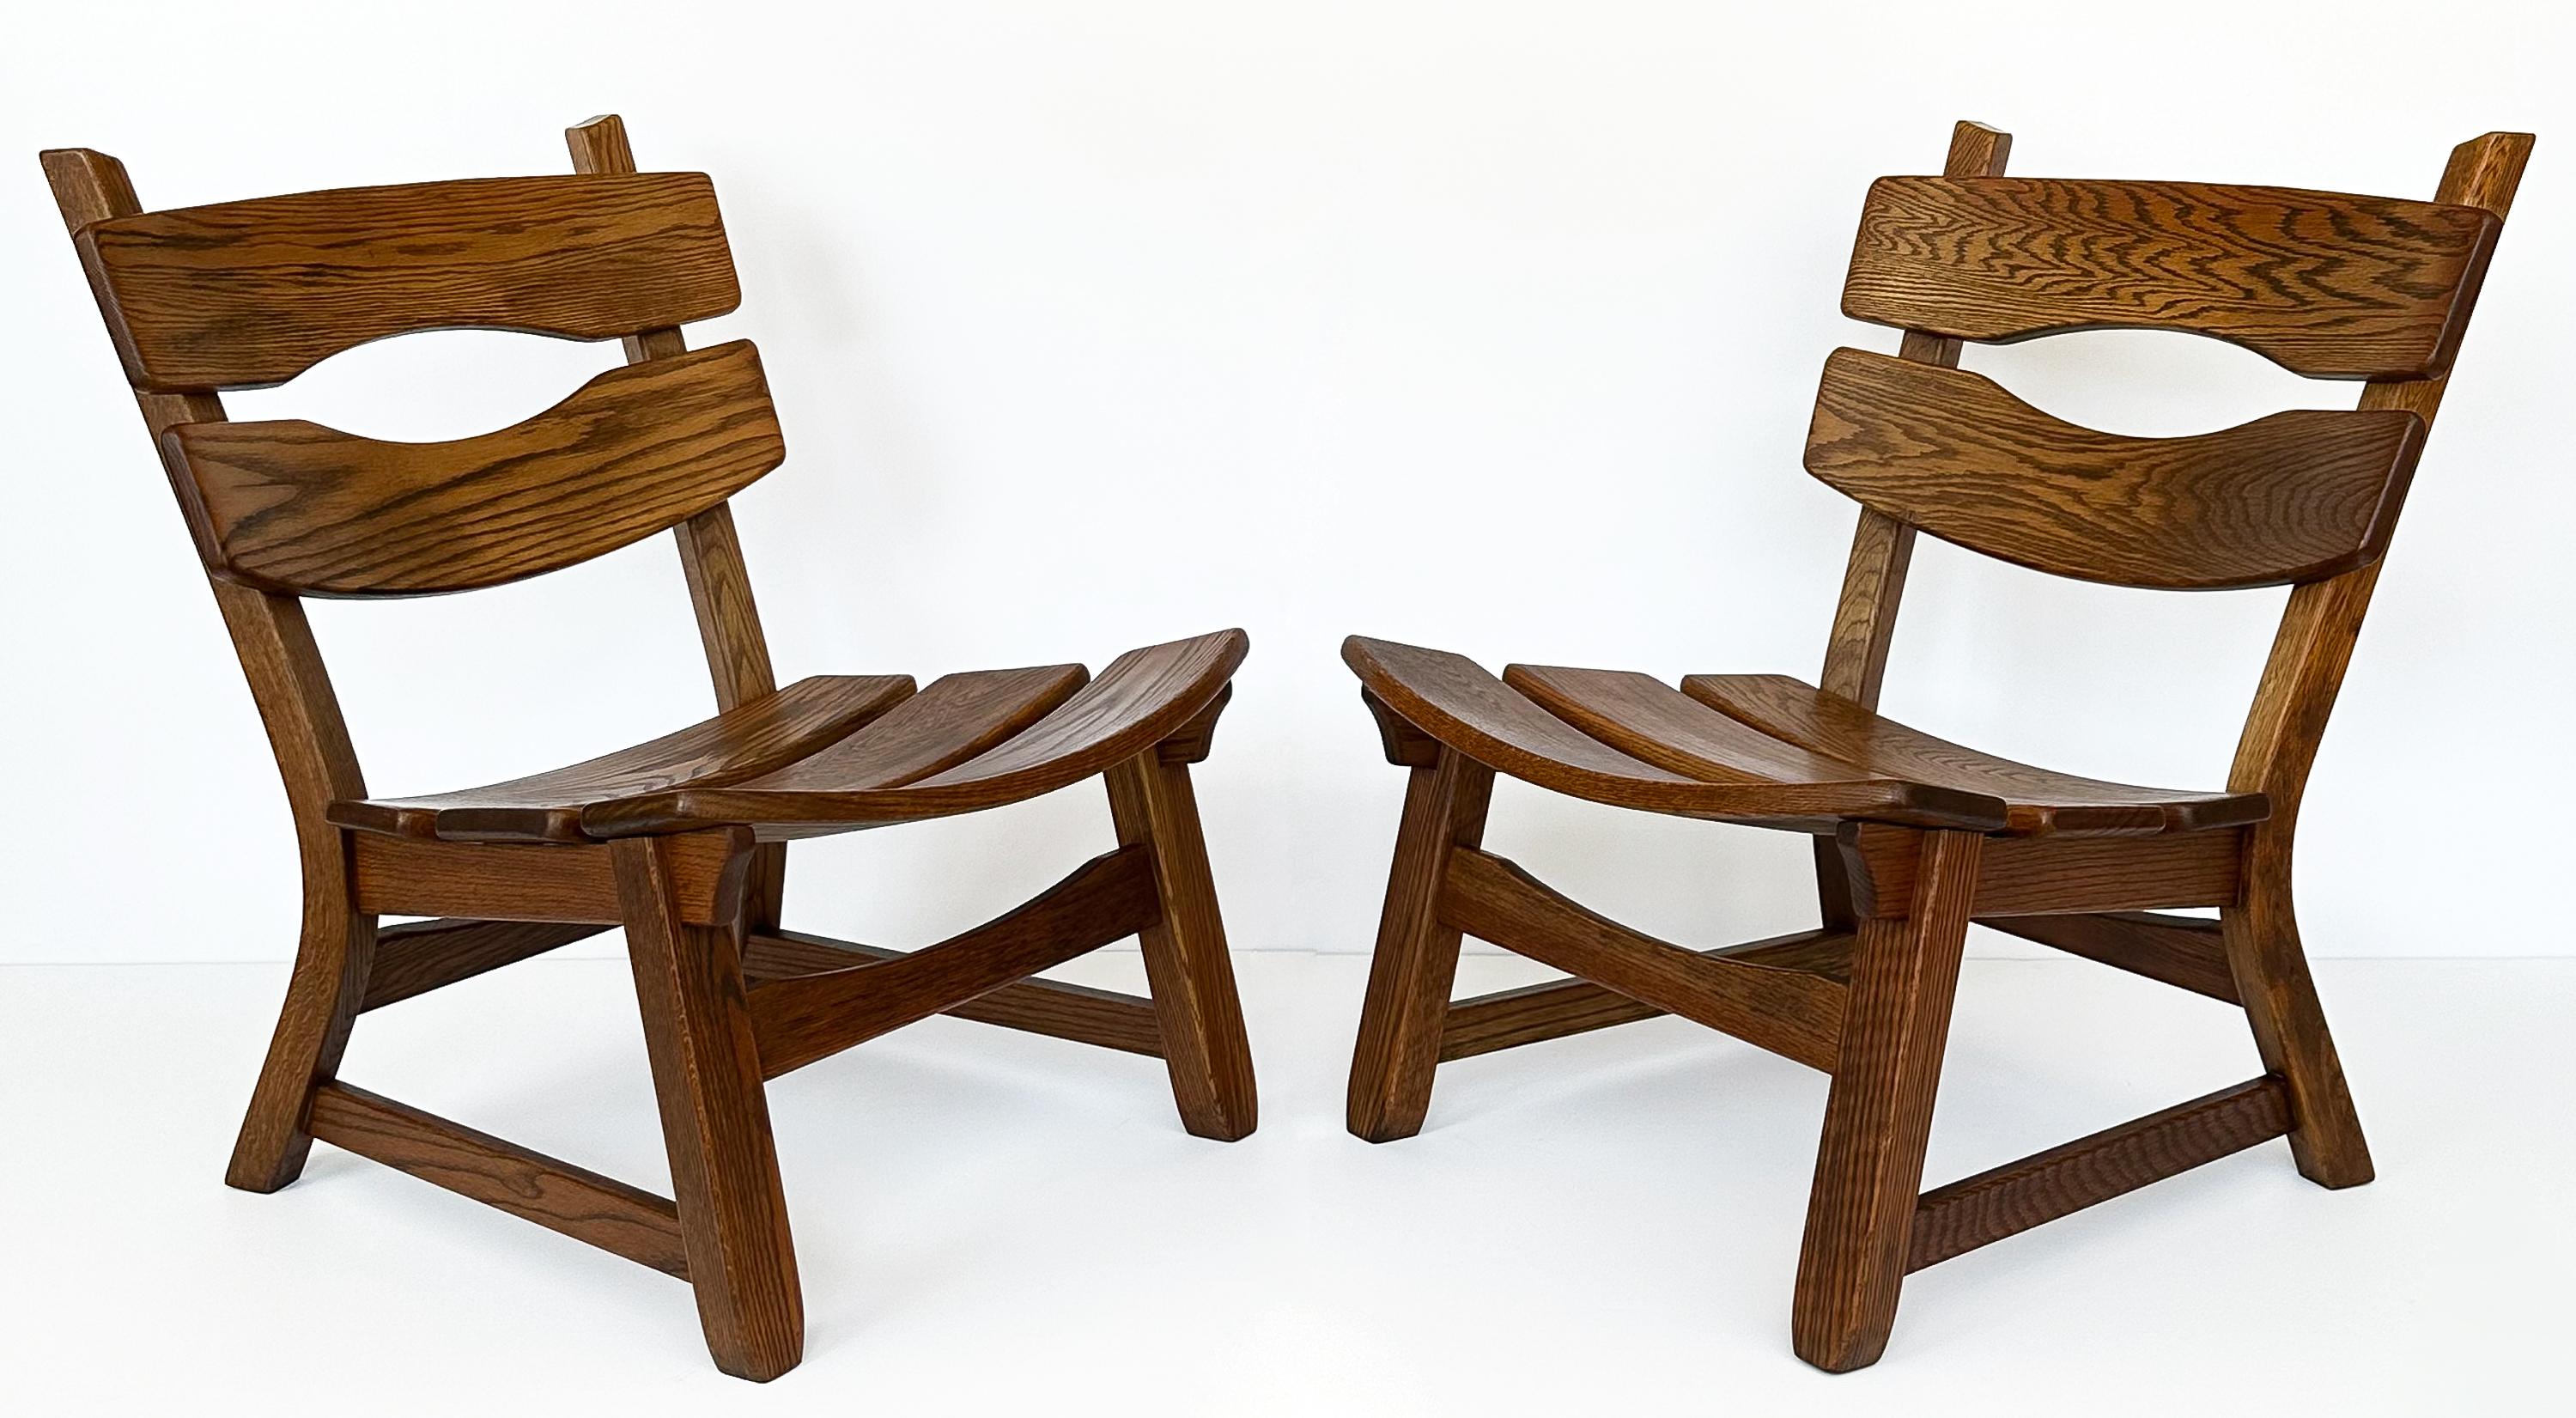 These rustic modernist solid oak lounge chairs by Dittmann & Co for AWA Radboud, crafted in the Netherlands during the 1970s, are a testament to robust design and enduring craftsmanship. The chairs, devoid of armrests, embrace the essence of the